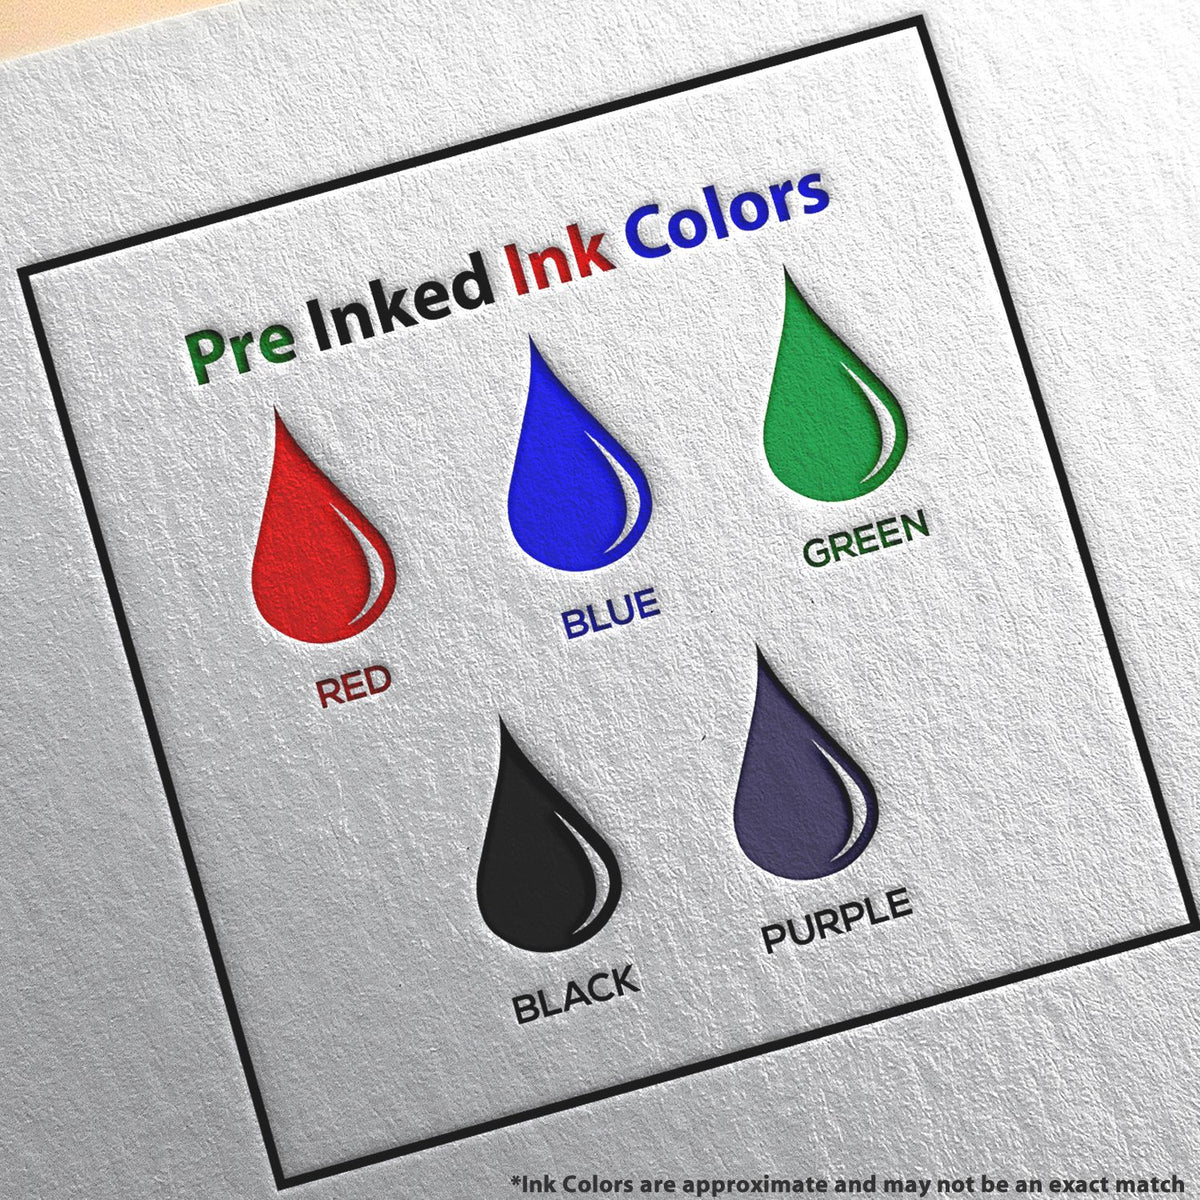 A picture showing the different ink colors or hues available for the Slim Pre-Inked Nevada Professional Engineer Seal Stamp product.